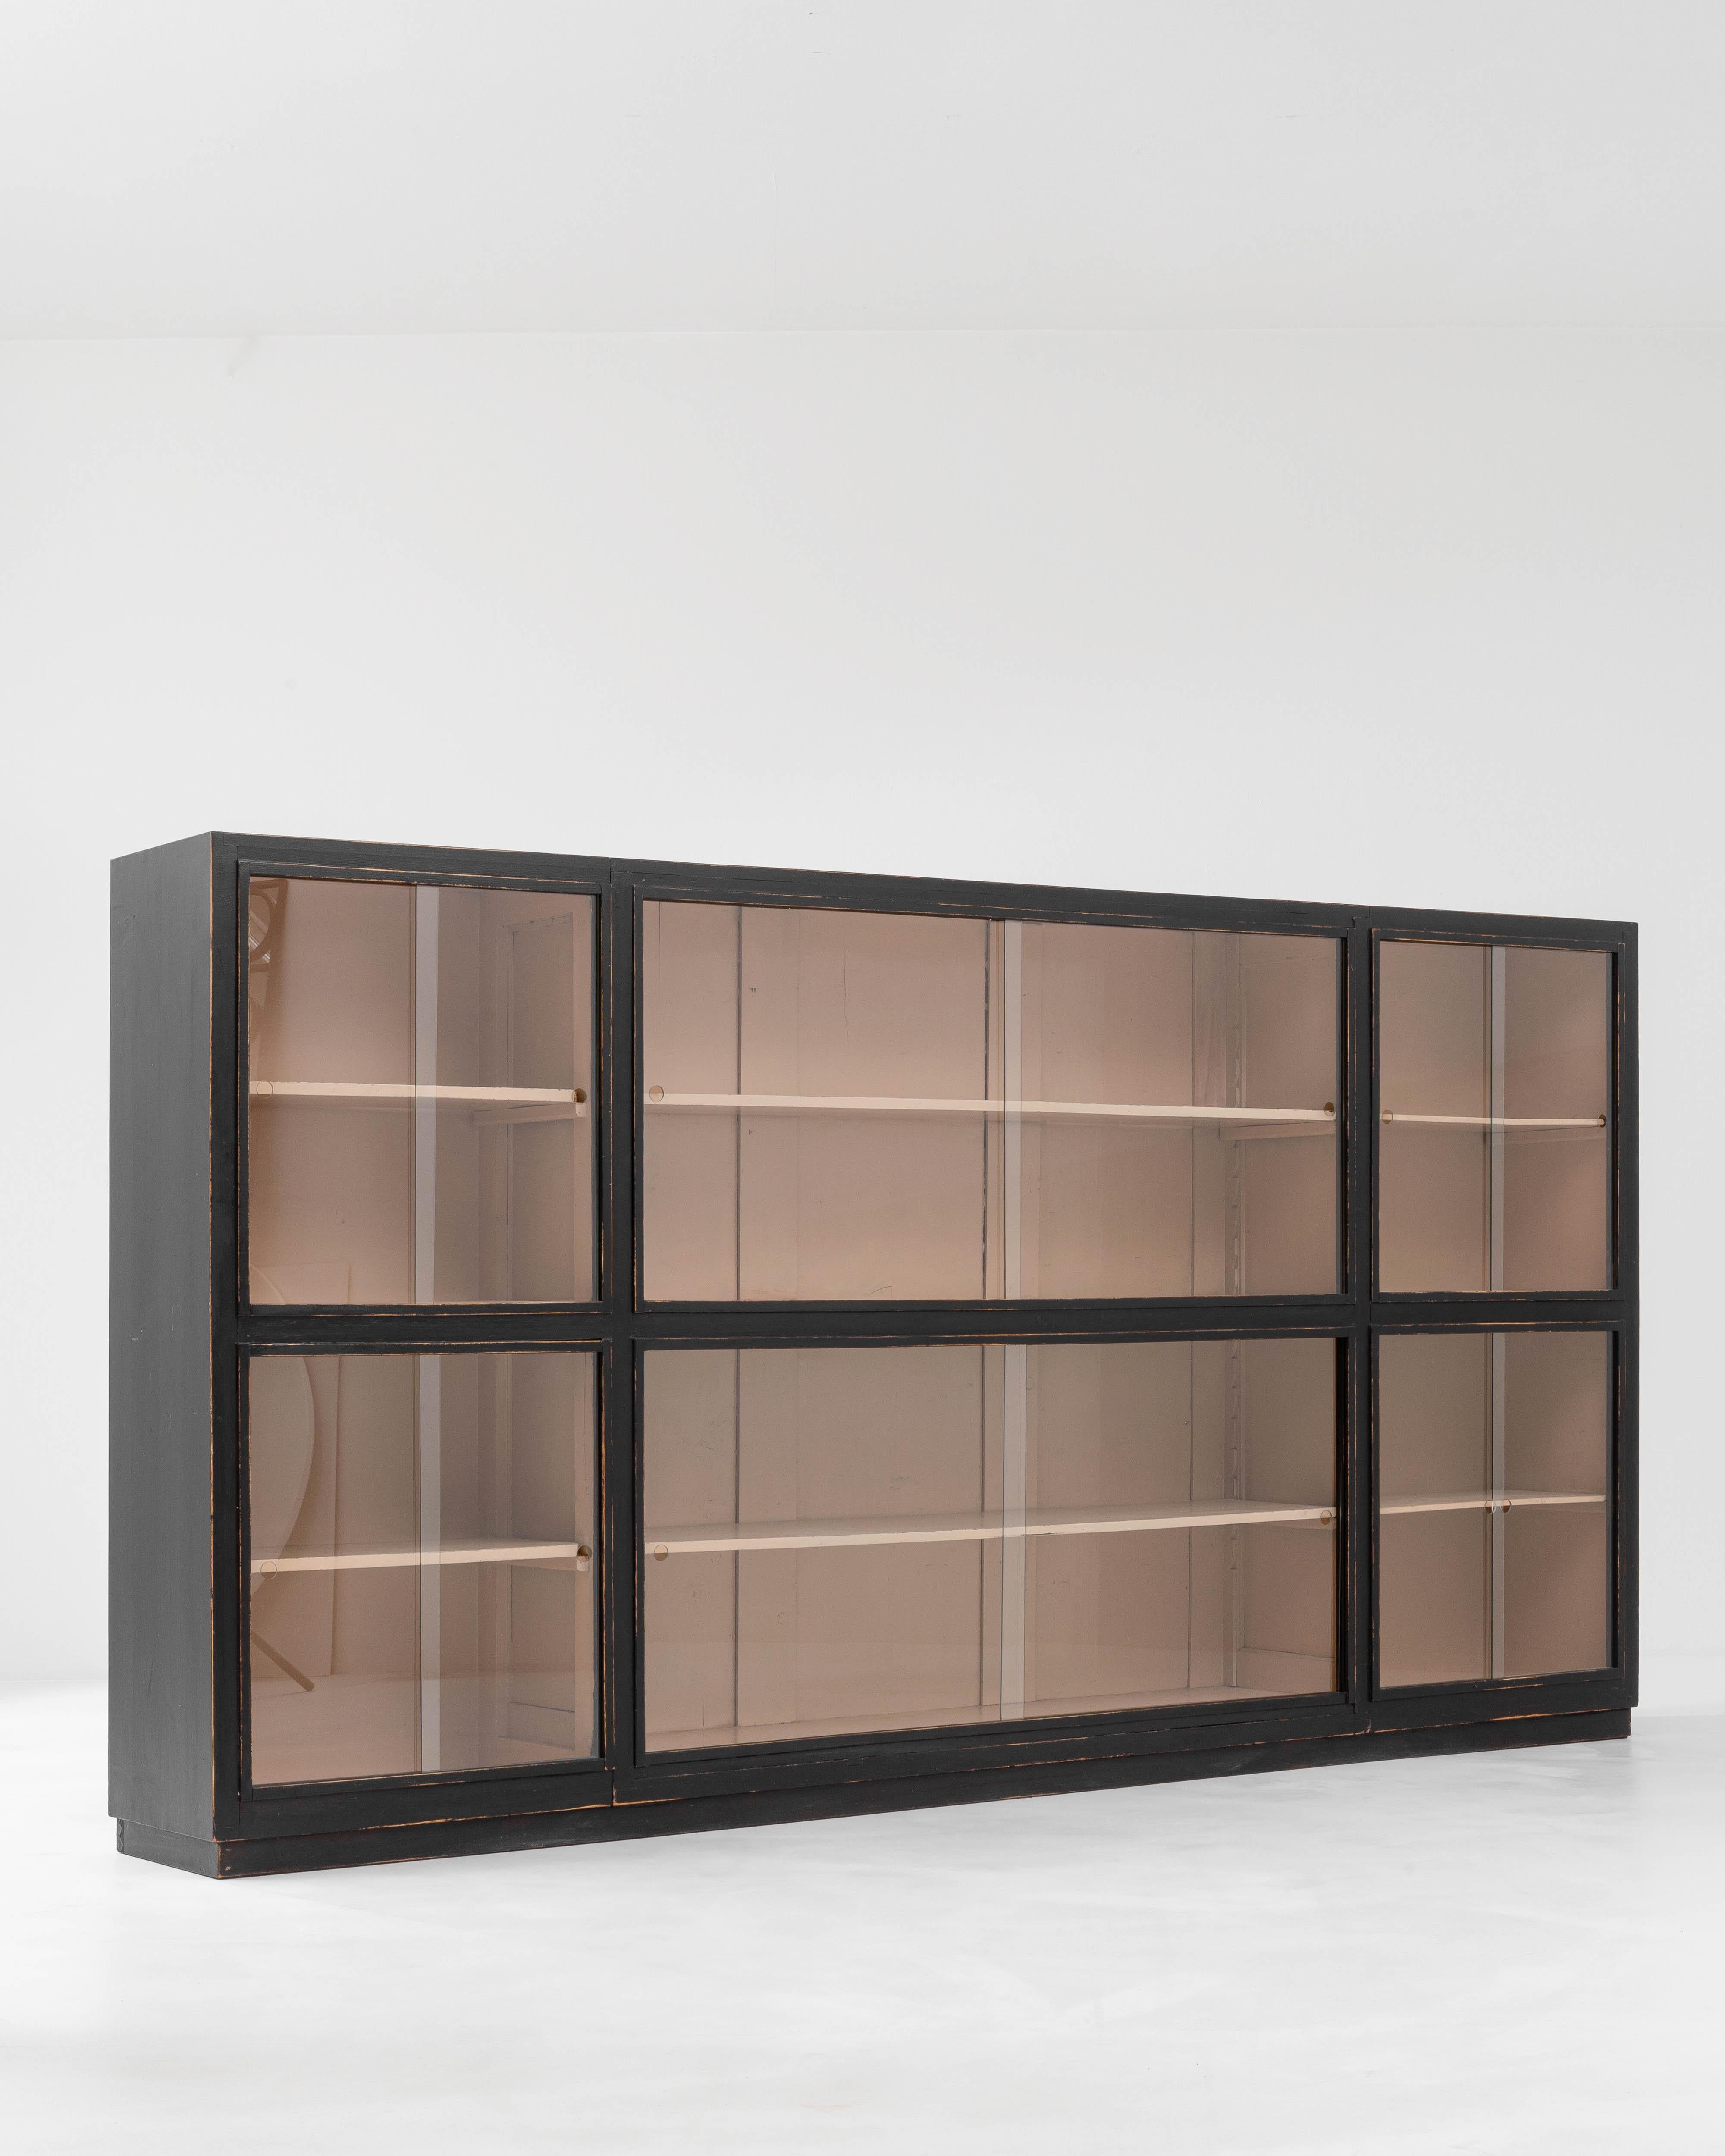 Exhibiting a sleek modern elegance, this minimalist vitrine was designed in 20th-century France. The rectangular, black-patinated base encloses glass panels, dividing the interior into six sections. The black lines of the exterior frame stylishly